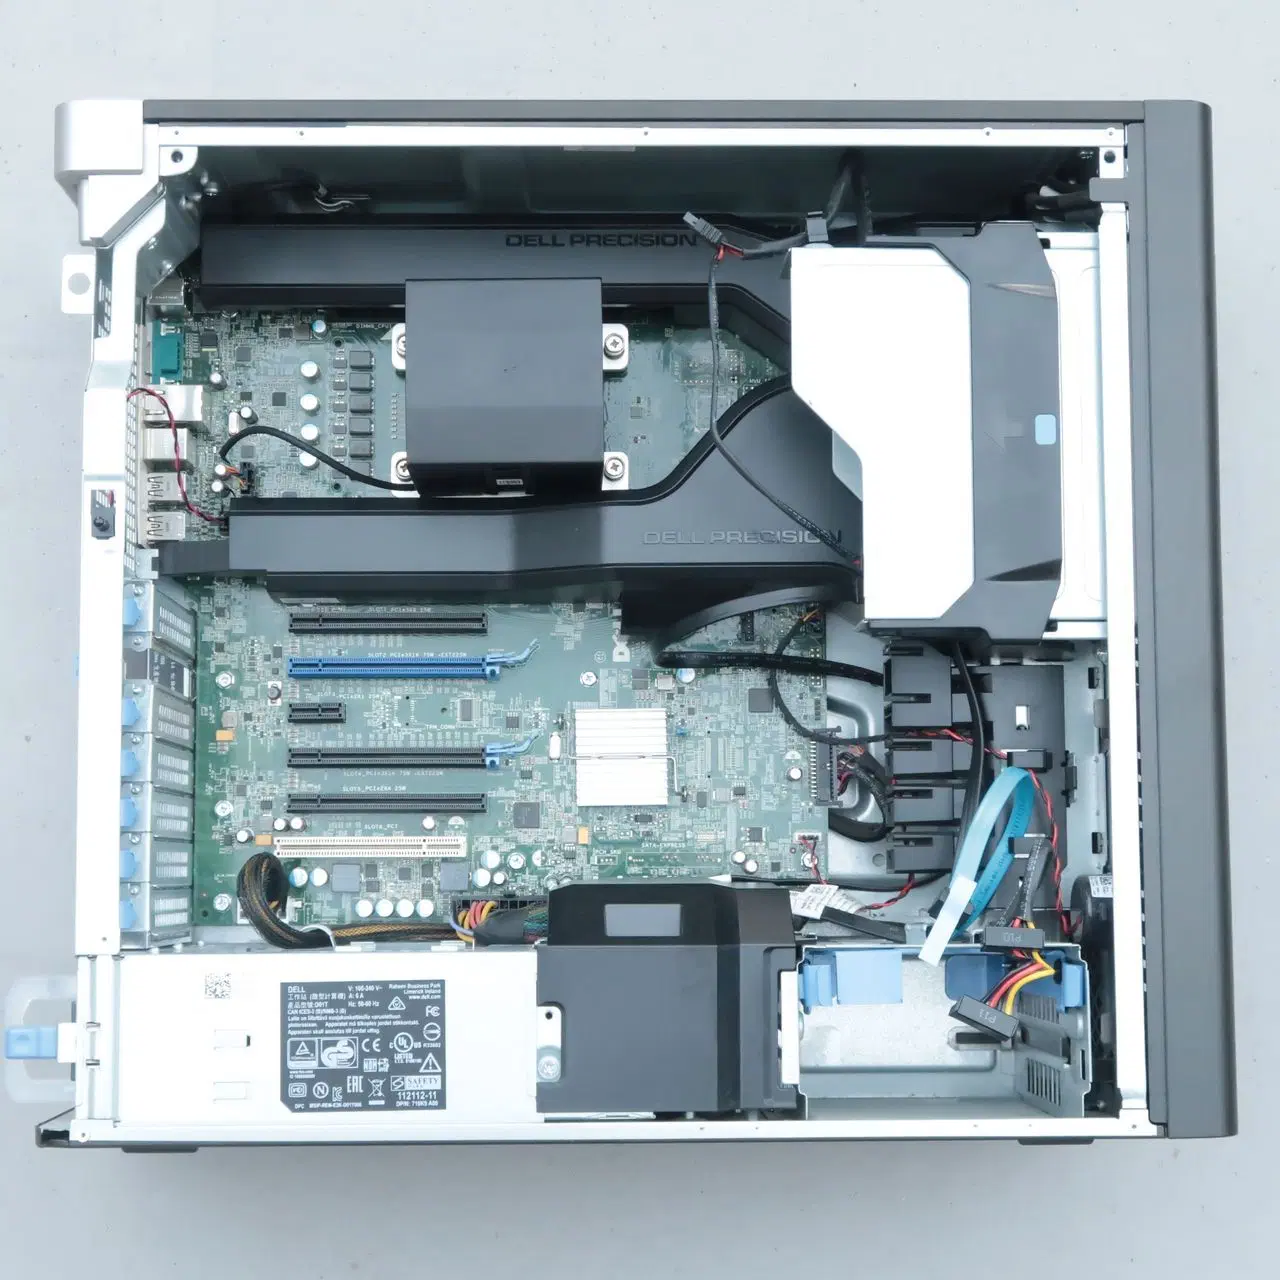 DELL Precision Tower 5810 Workstation / 1. ハードウェア編 | roomX Blog